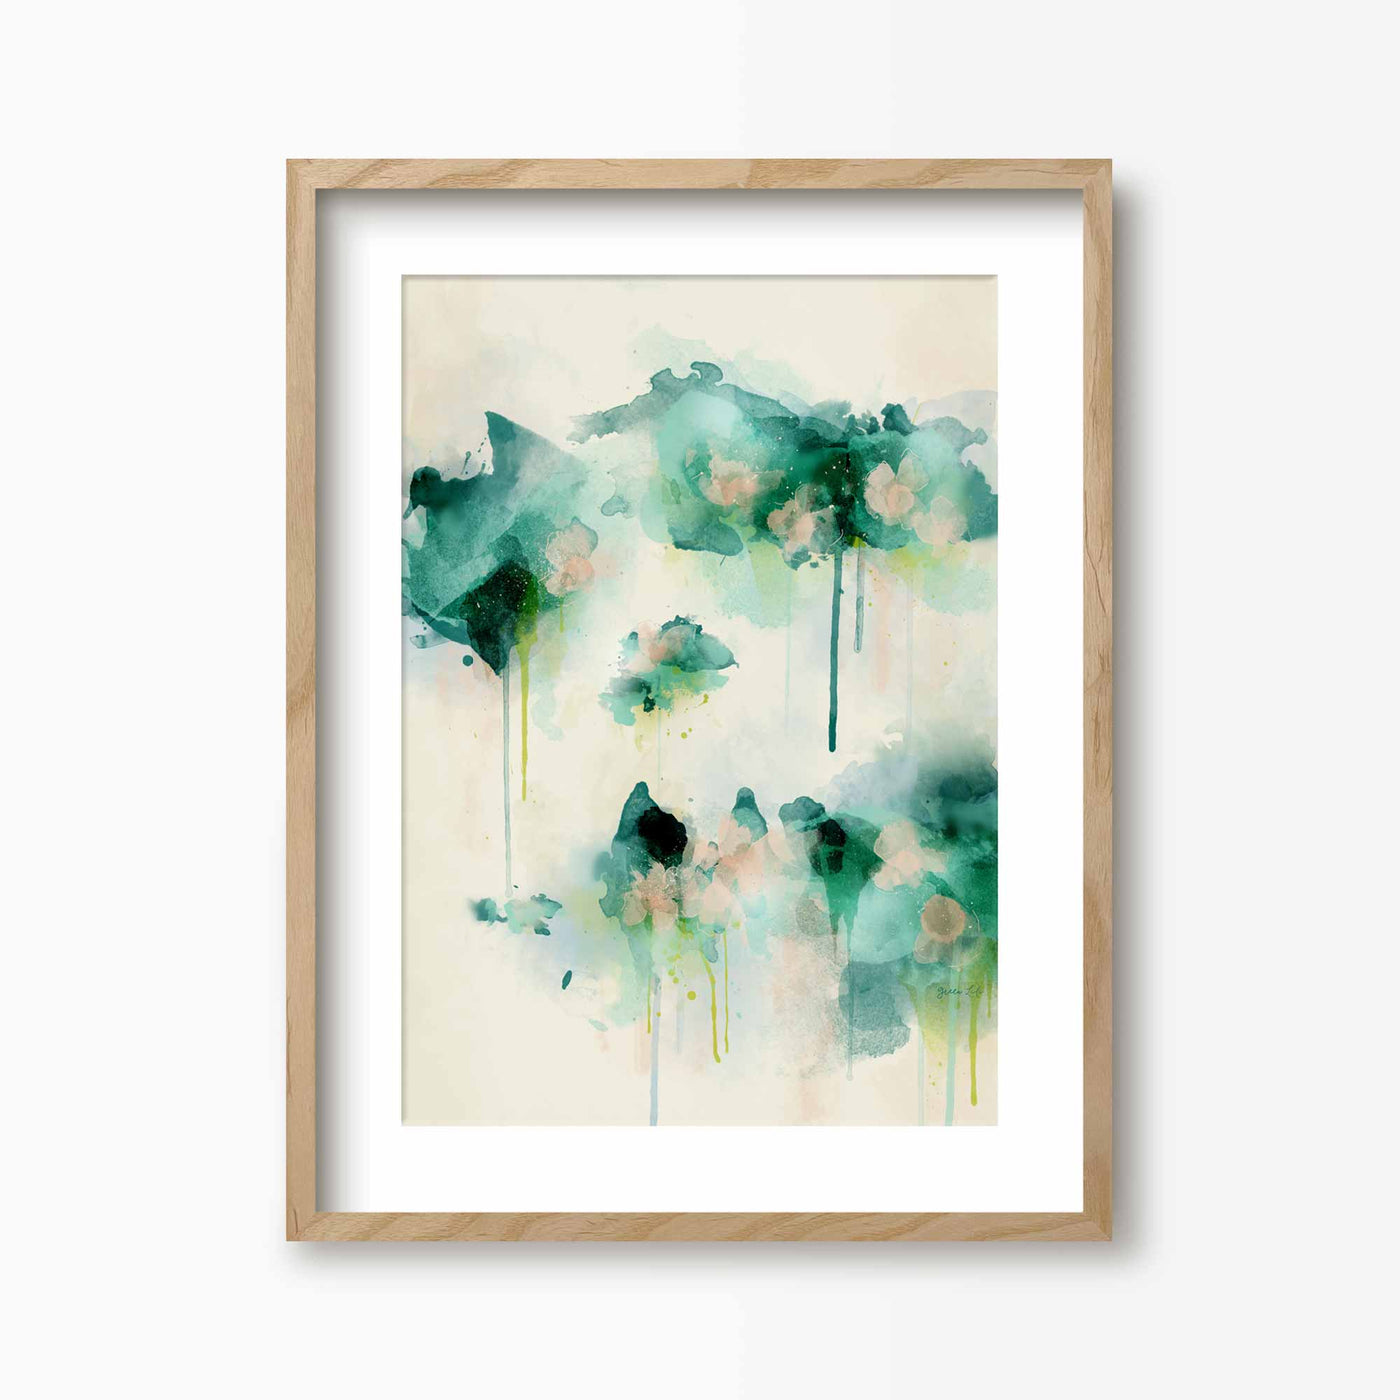 Green Lili 30x40cm (12x16") / Natural Frame + Mount Spring Dream Abstract Floral Print